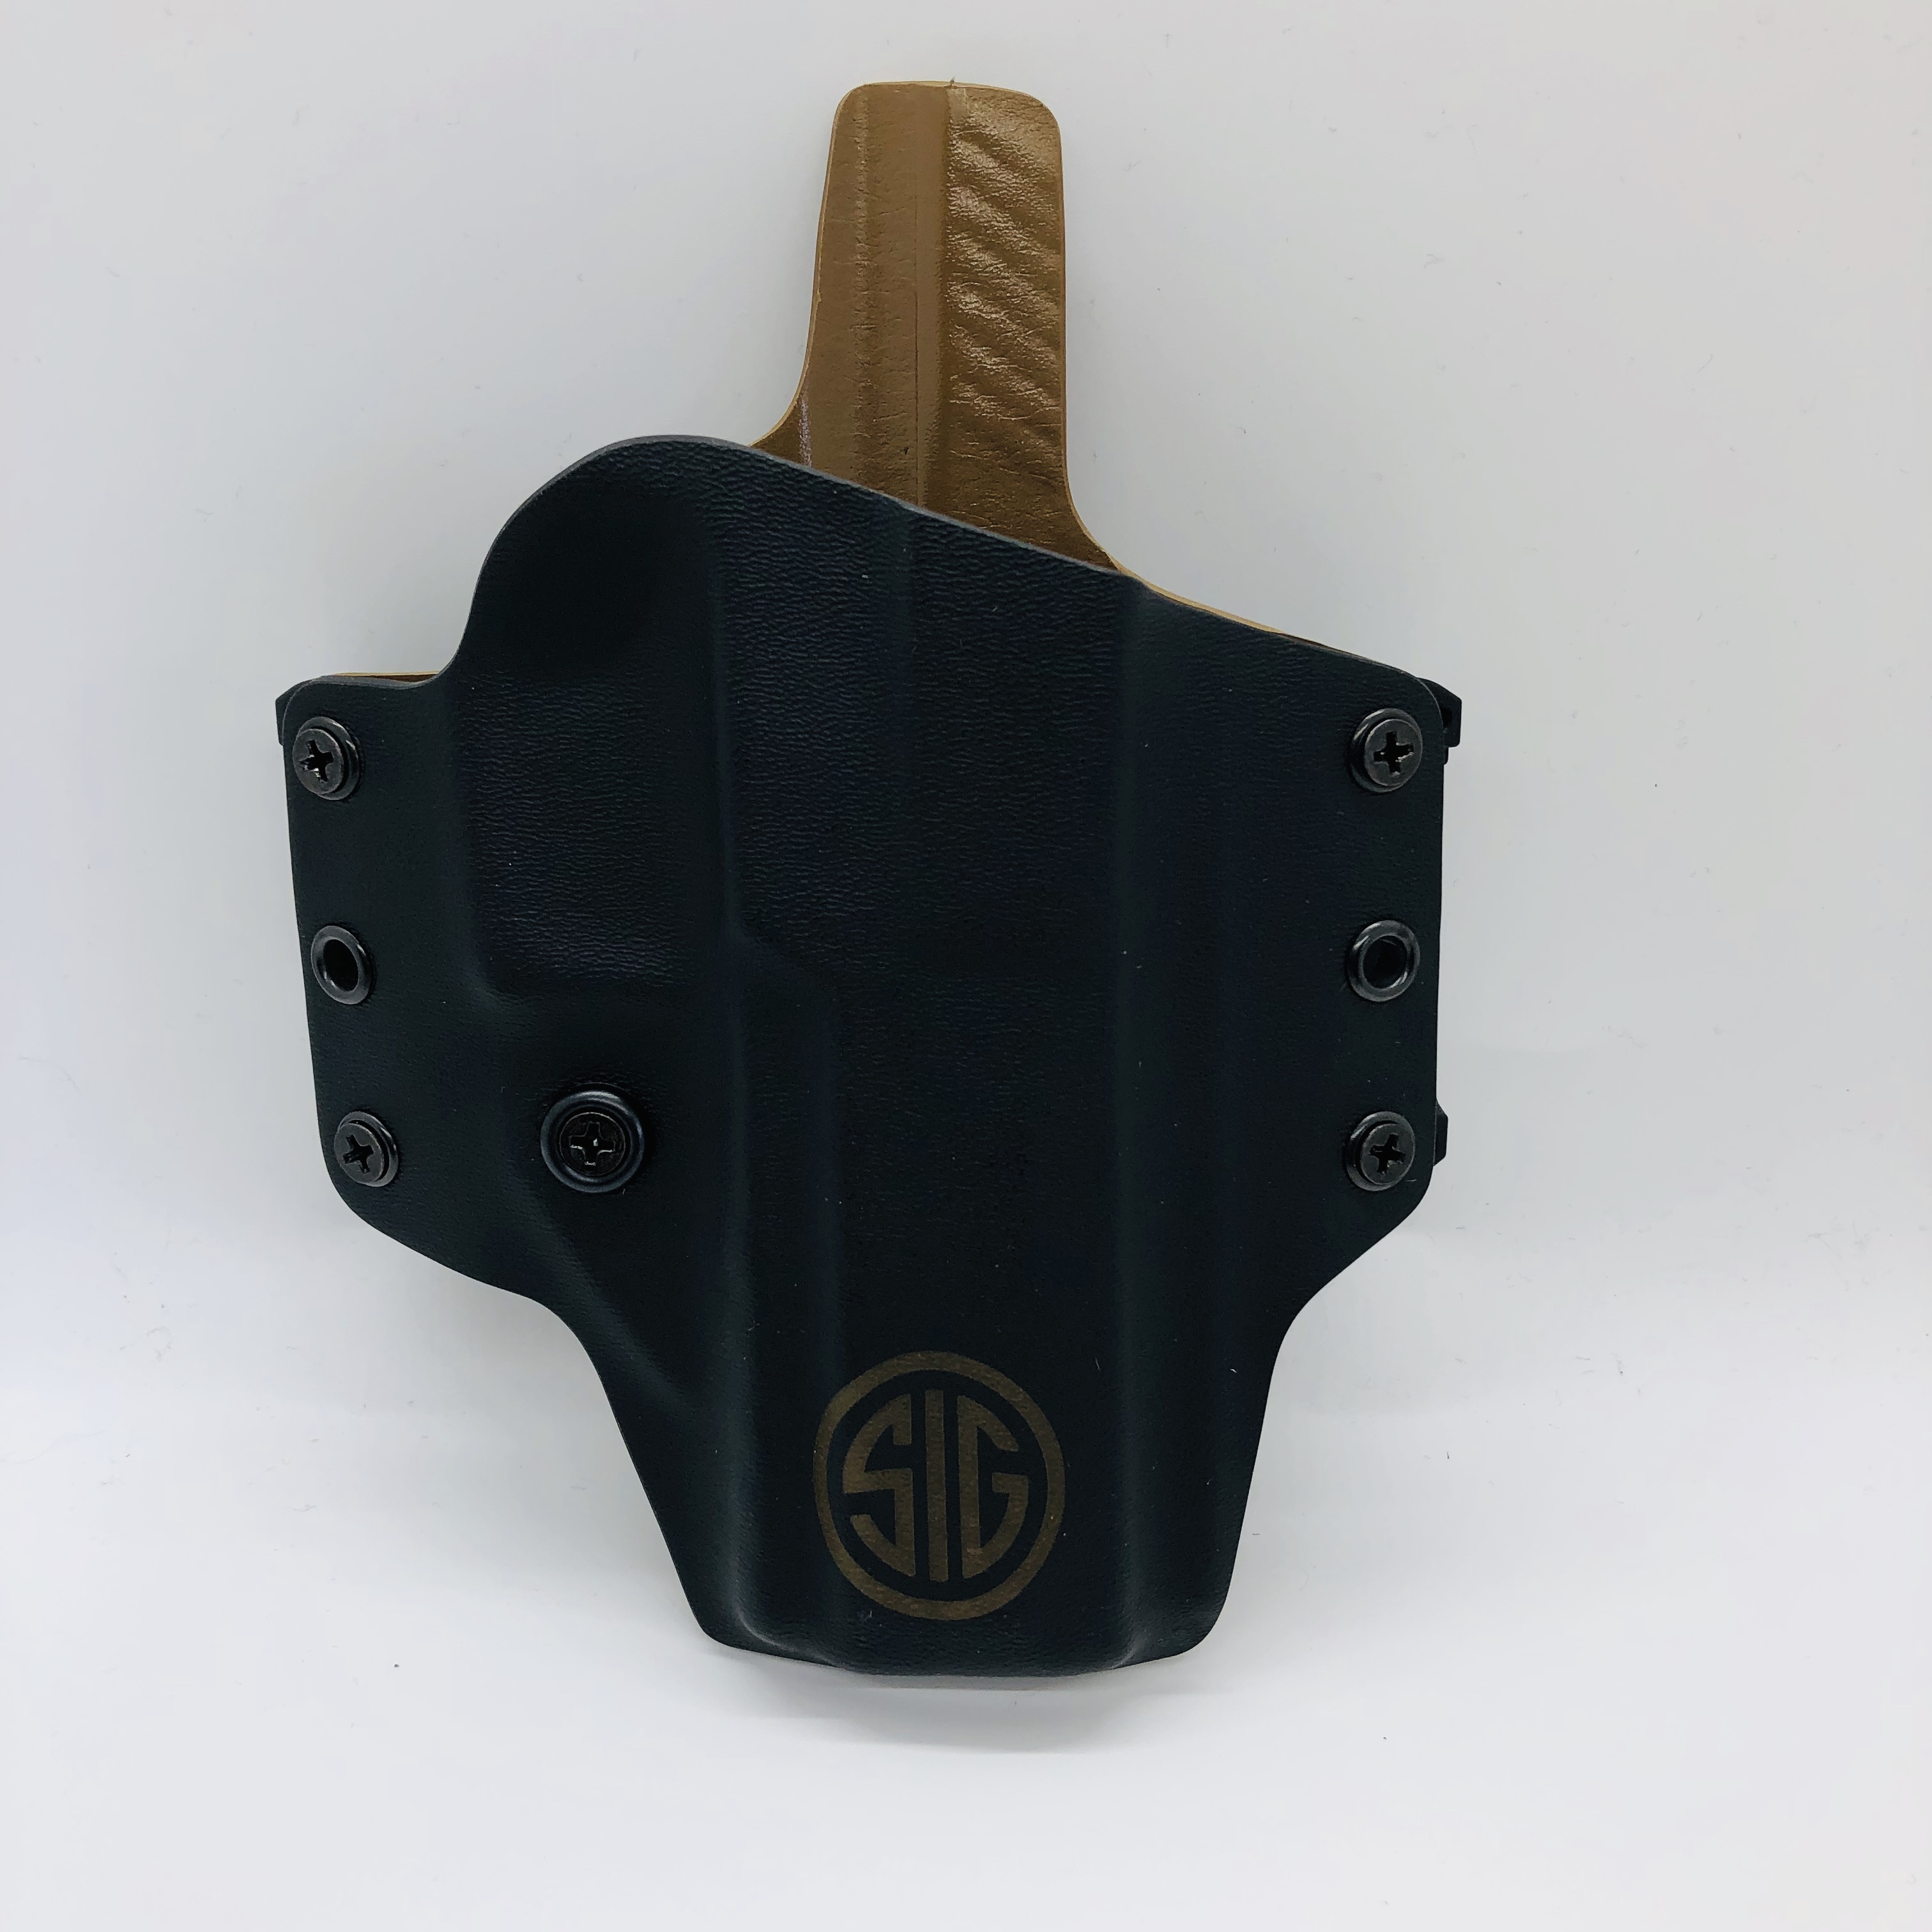 Blackpoint Tactical 105779 SIG Exclusive OWB Holster For SIG 320 F 9mm Blackpoint Tactical 105779 SIG Exclusive OWB Holster For SIG 320 F 9mm